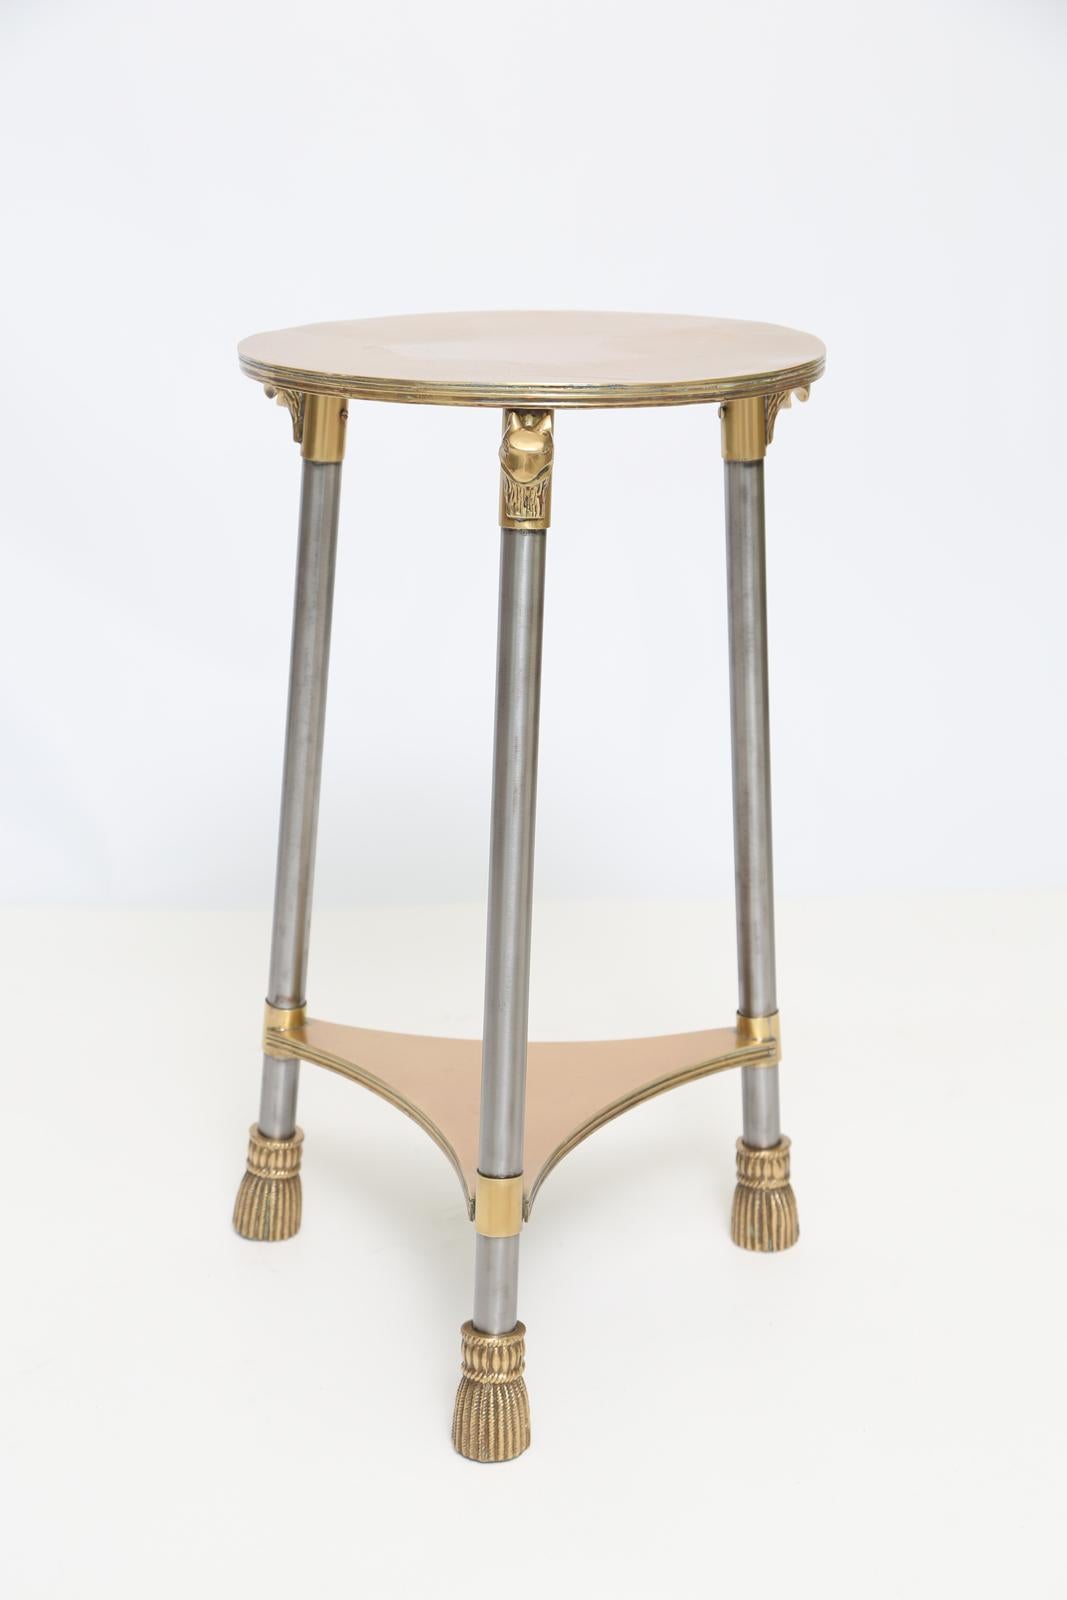 20th Century Vintage Neoclassical Occasional Table of Brass and Polished Steel For Sale